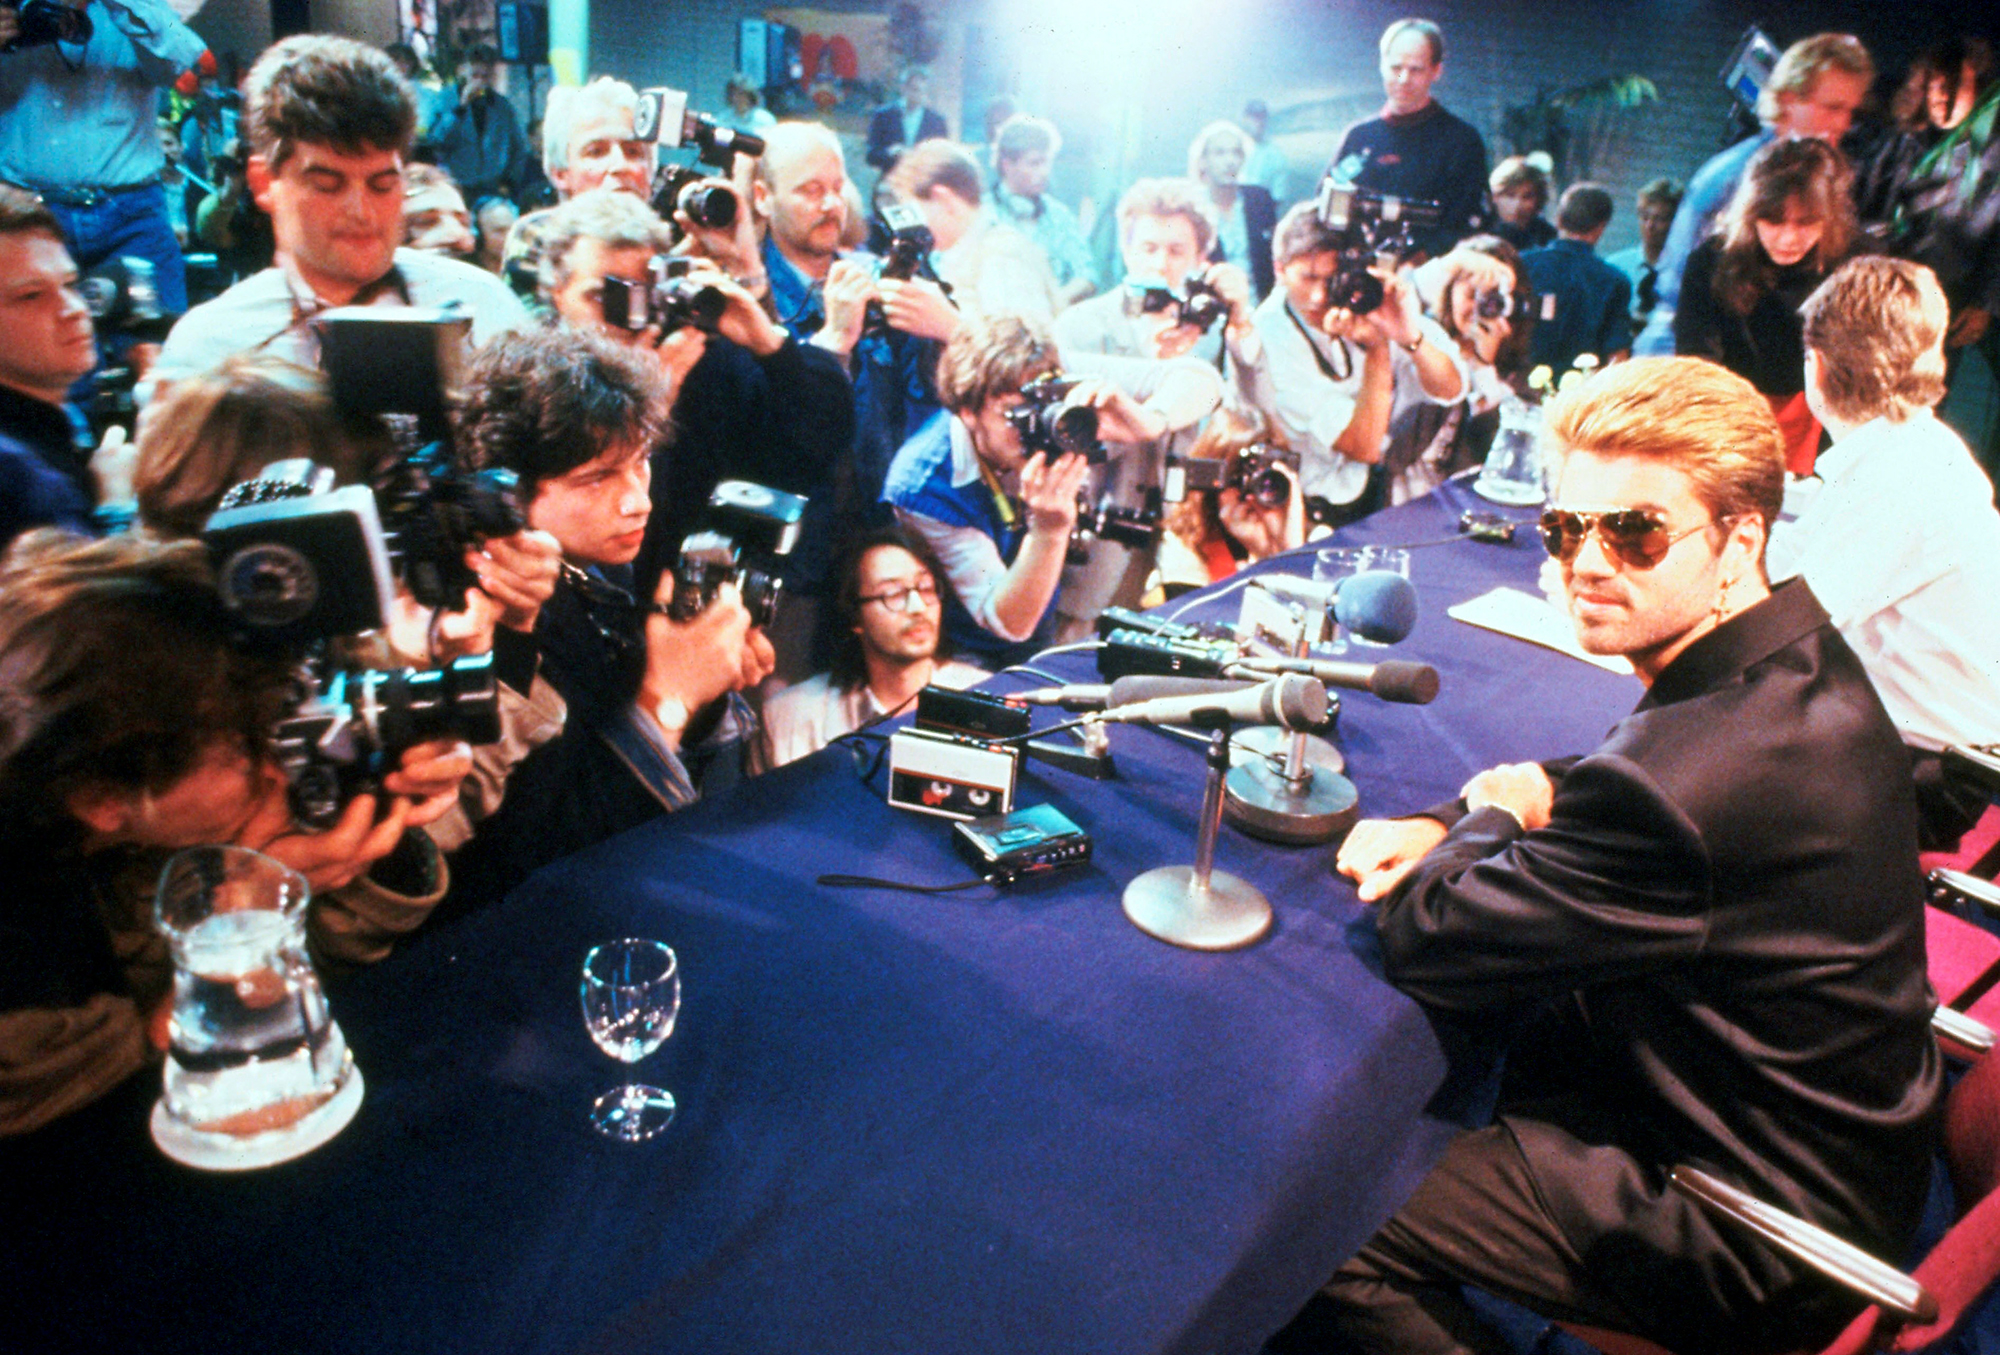 George Michael at a press conference in Japan, March 1988.